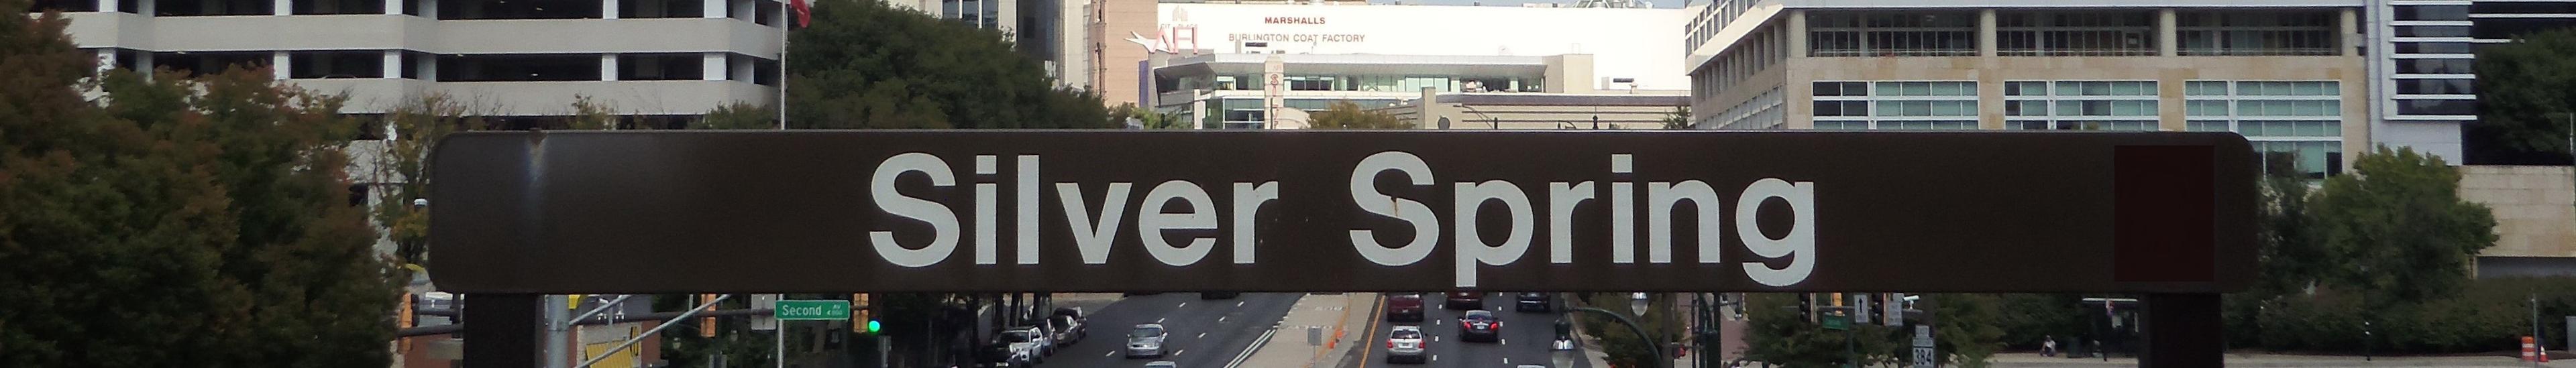 Banner image for Silver Spring on GigsGuide